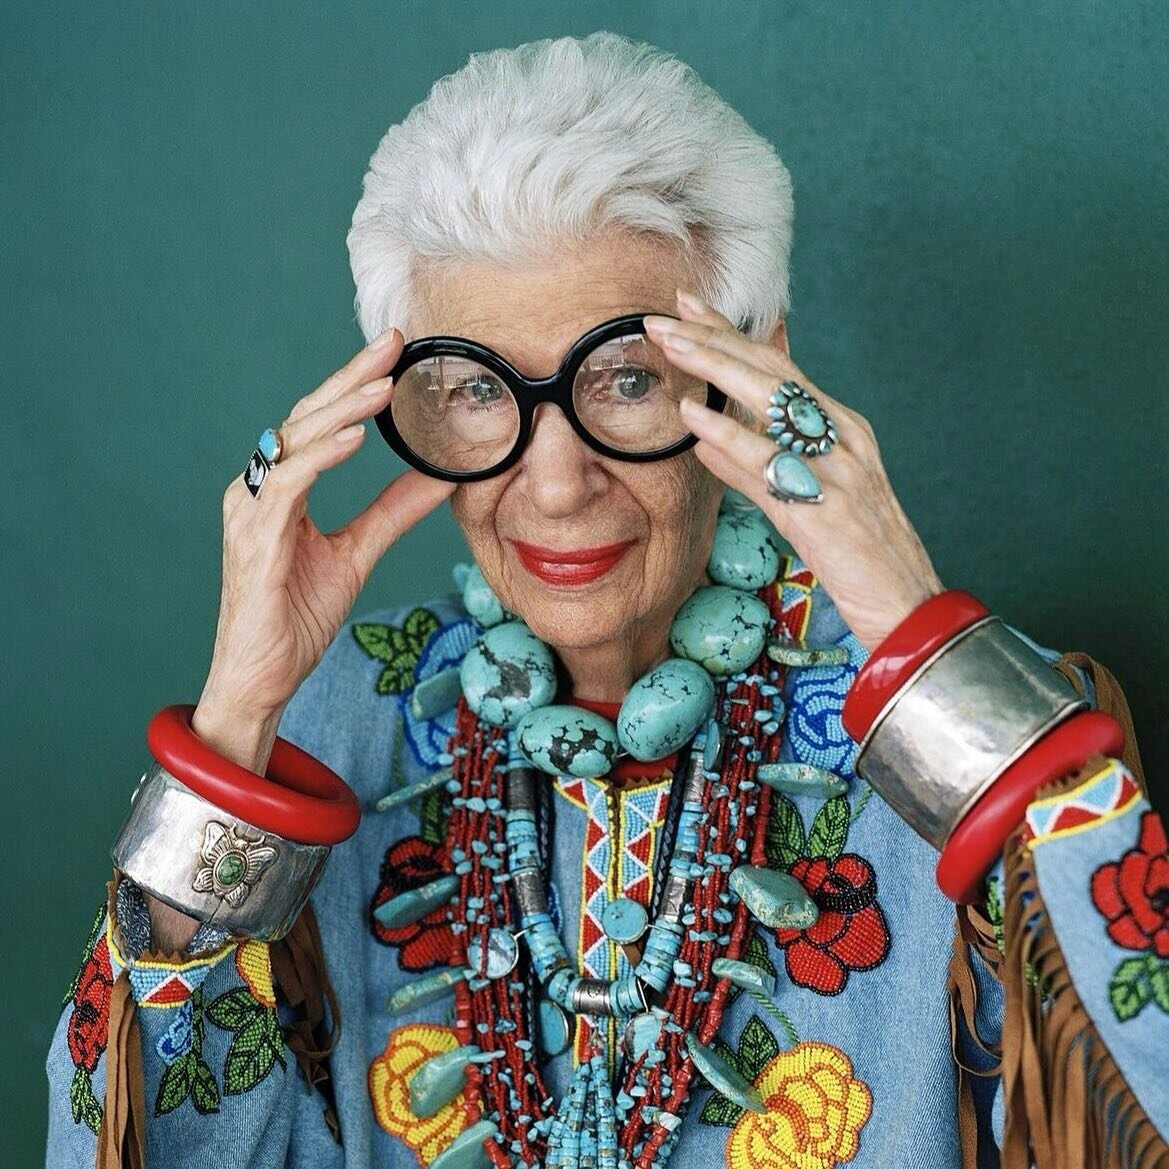 💙🩵Iris Apfel🩵💙 style hero and jewellery QUEEN! From a textile design background, she was on my radar since the &lsquo;90s but her ability to pull off the most colourful, flamboyant style with piles of costume jewellery and joi de vivre made her m